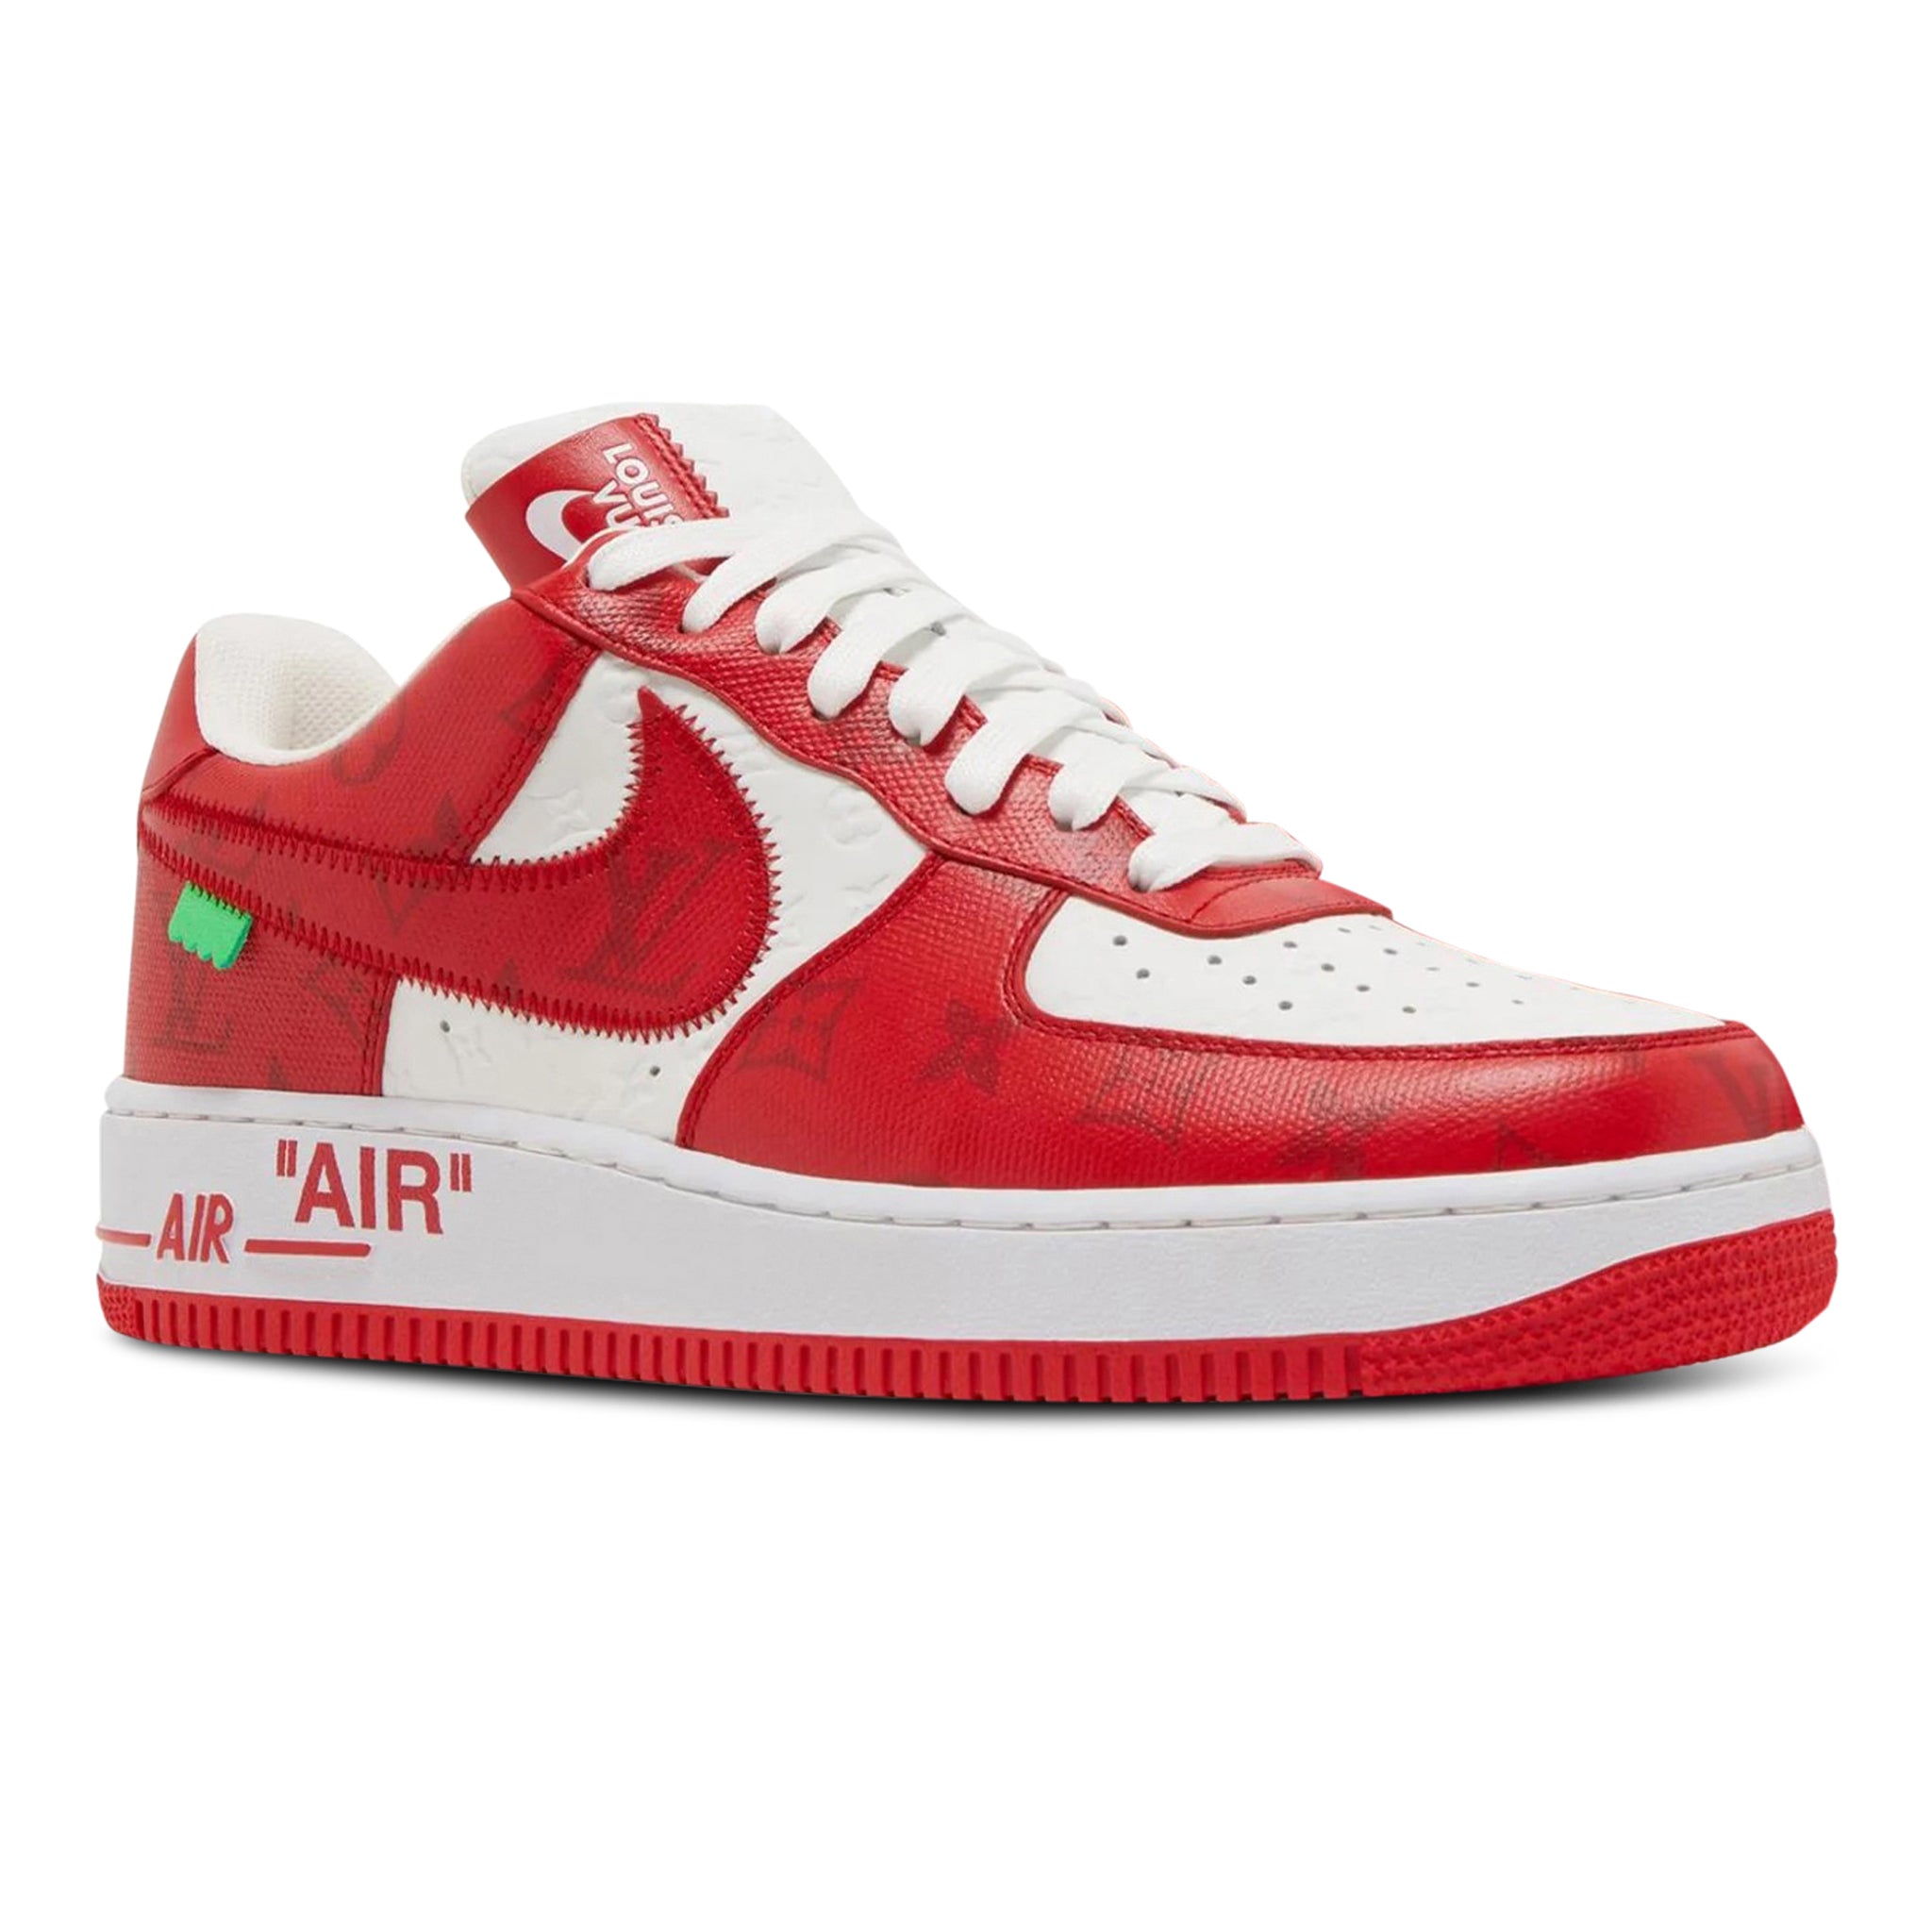 Louis Vuitton x Nike Air Force 1 Low White Red - UK 7.5 / Red